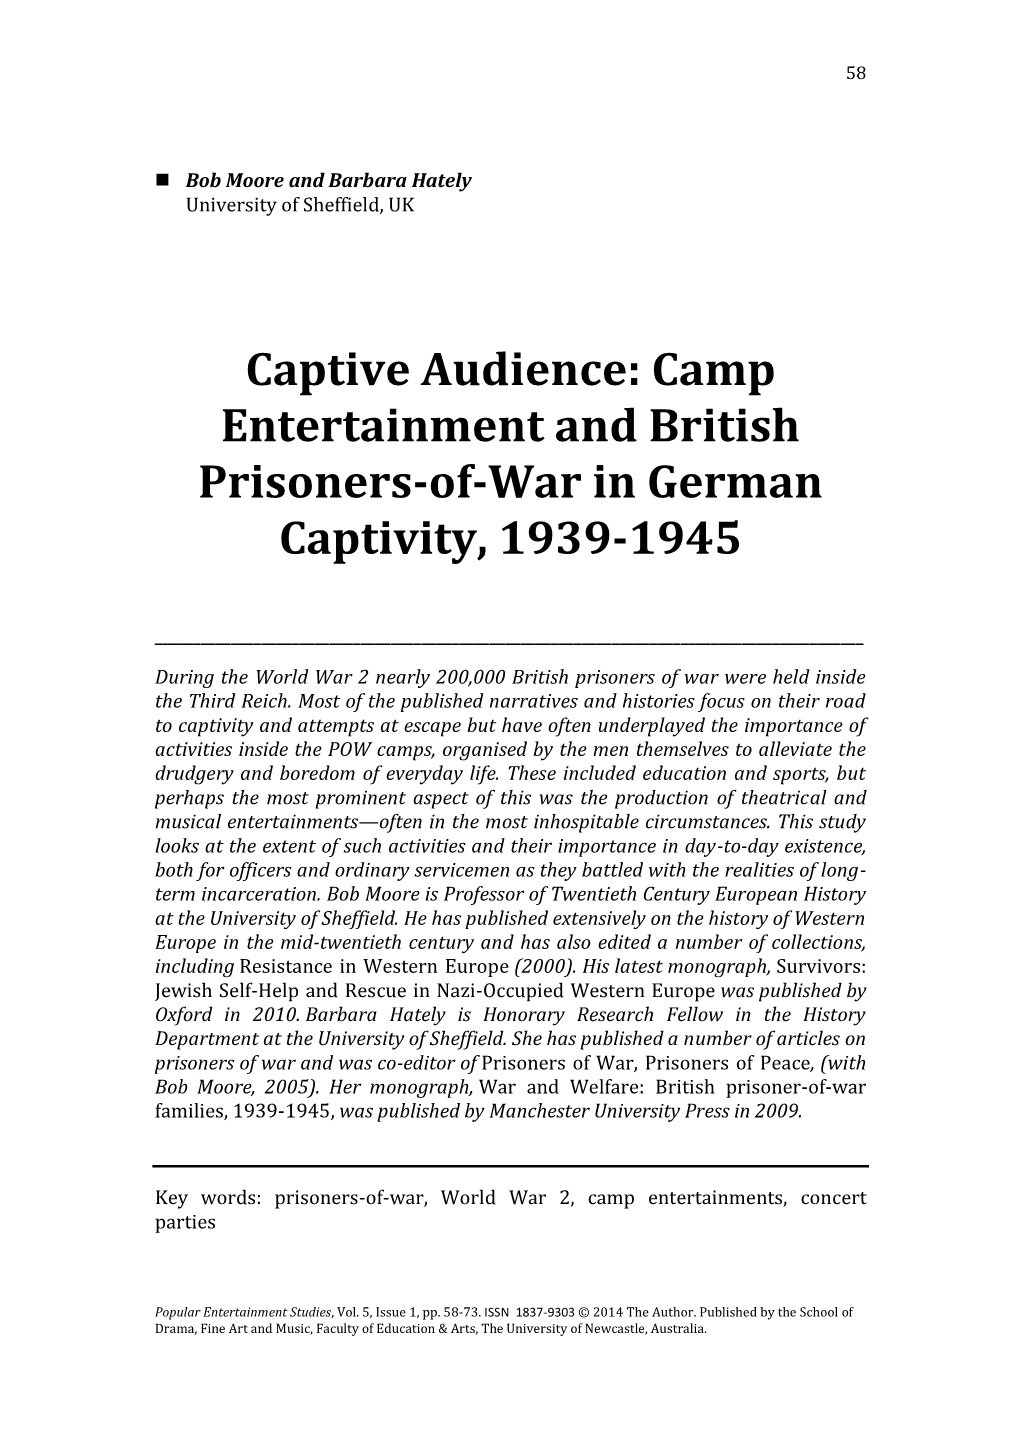 Camp Entertainment and British Prisoners-Of-War in German Captivity, 1939-1945